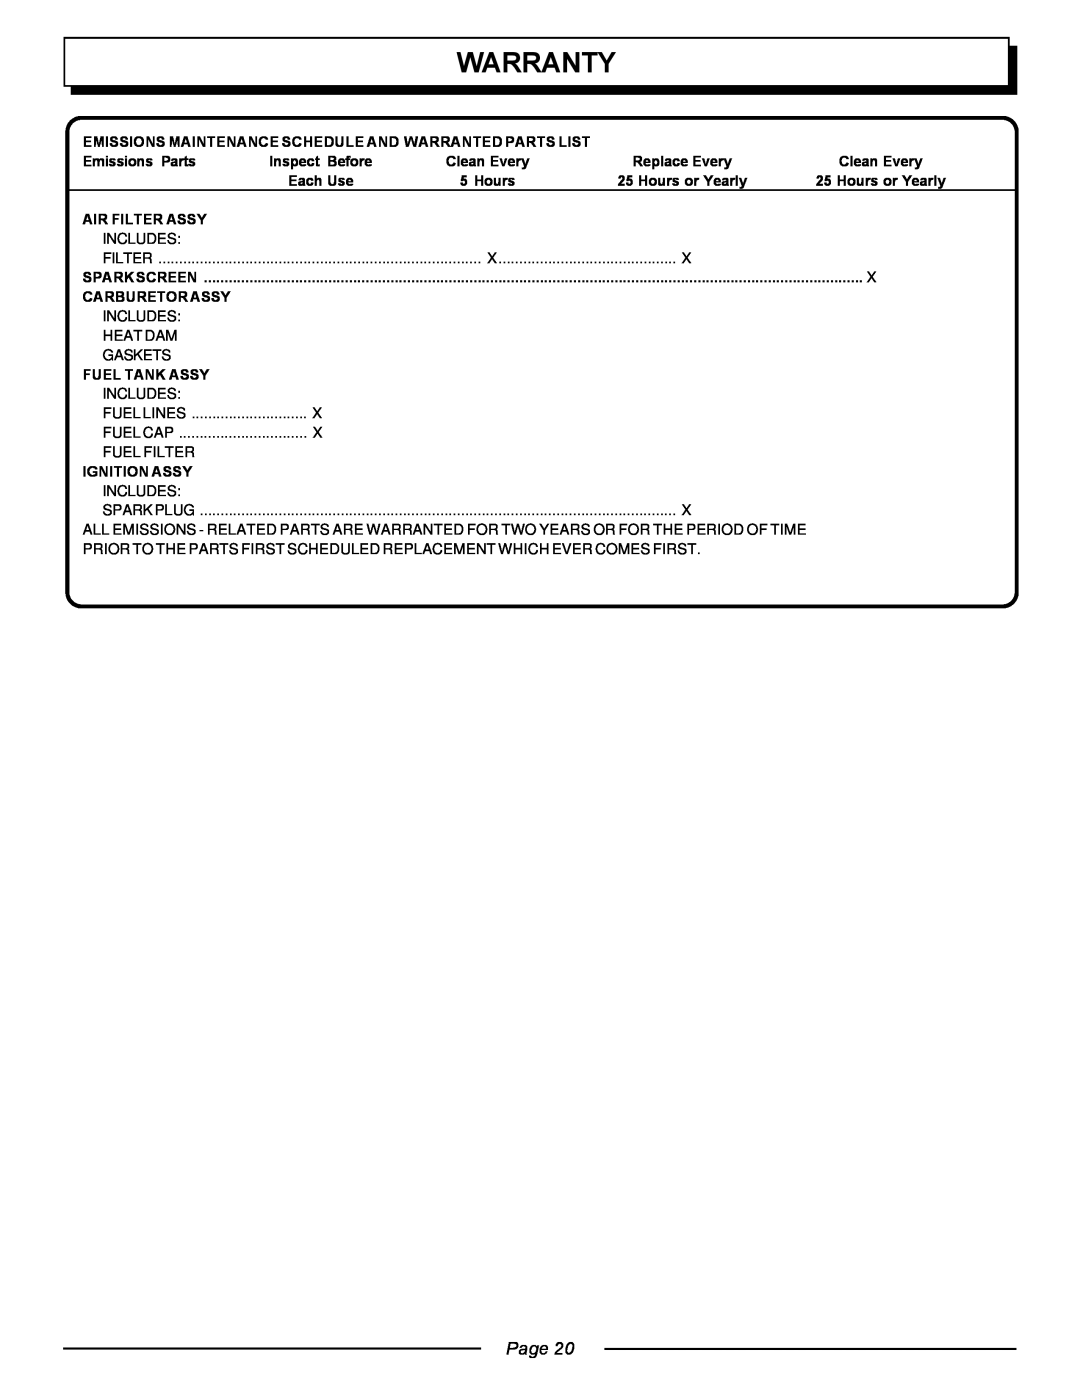 Homelite UT20763 Warranty, Page, Emissions Maintenance Schedule And Warranted Parts List, Emissions Parts, Each Use, Hours 